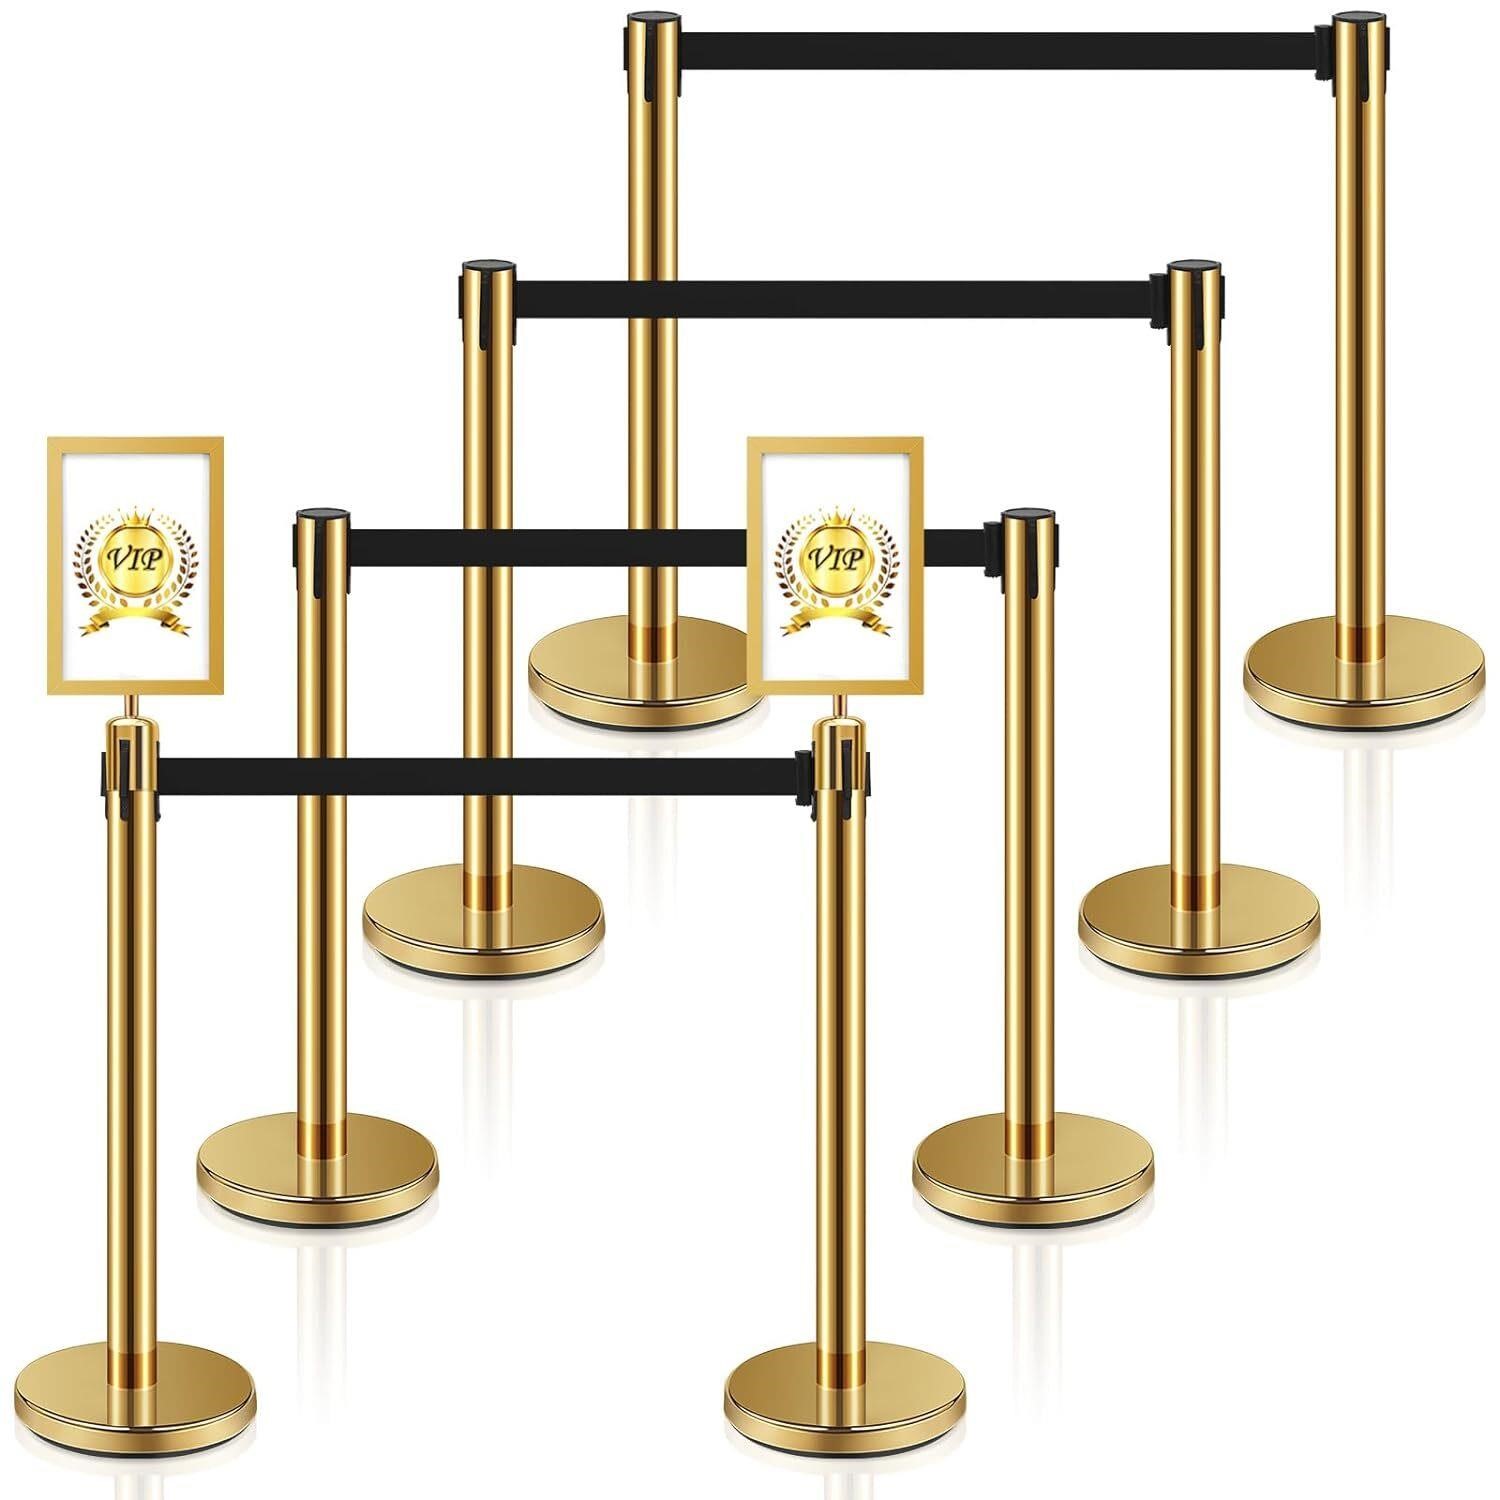 Set of 8Stainless Steel Stanchions.